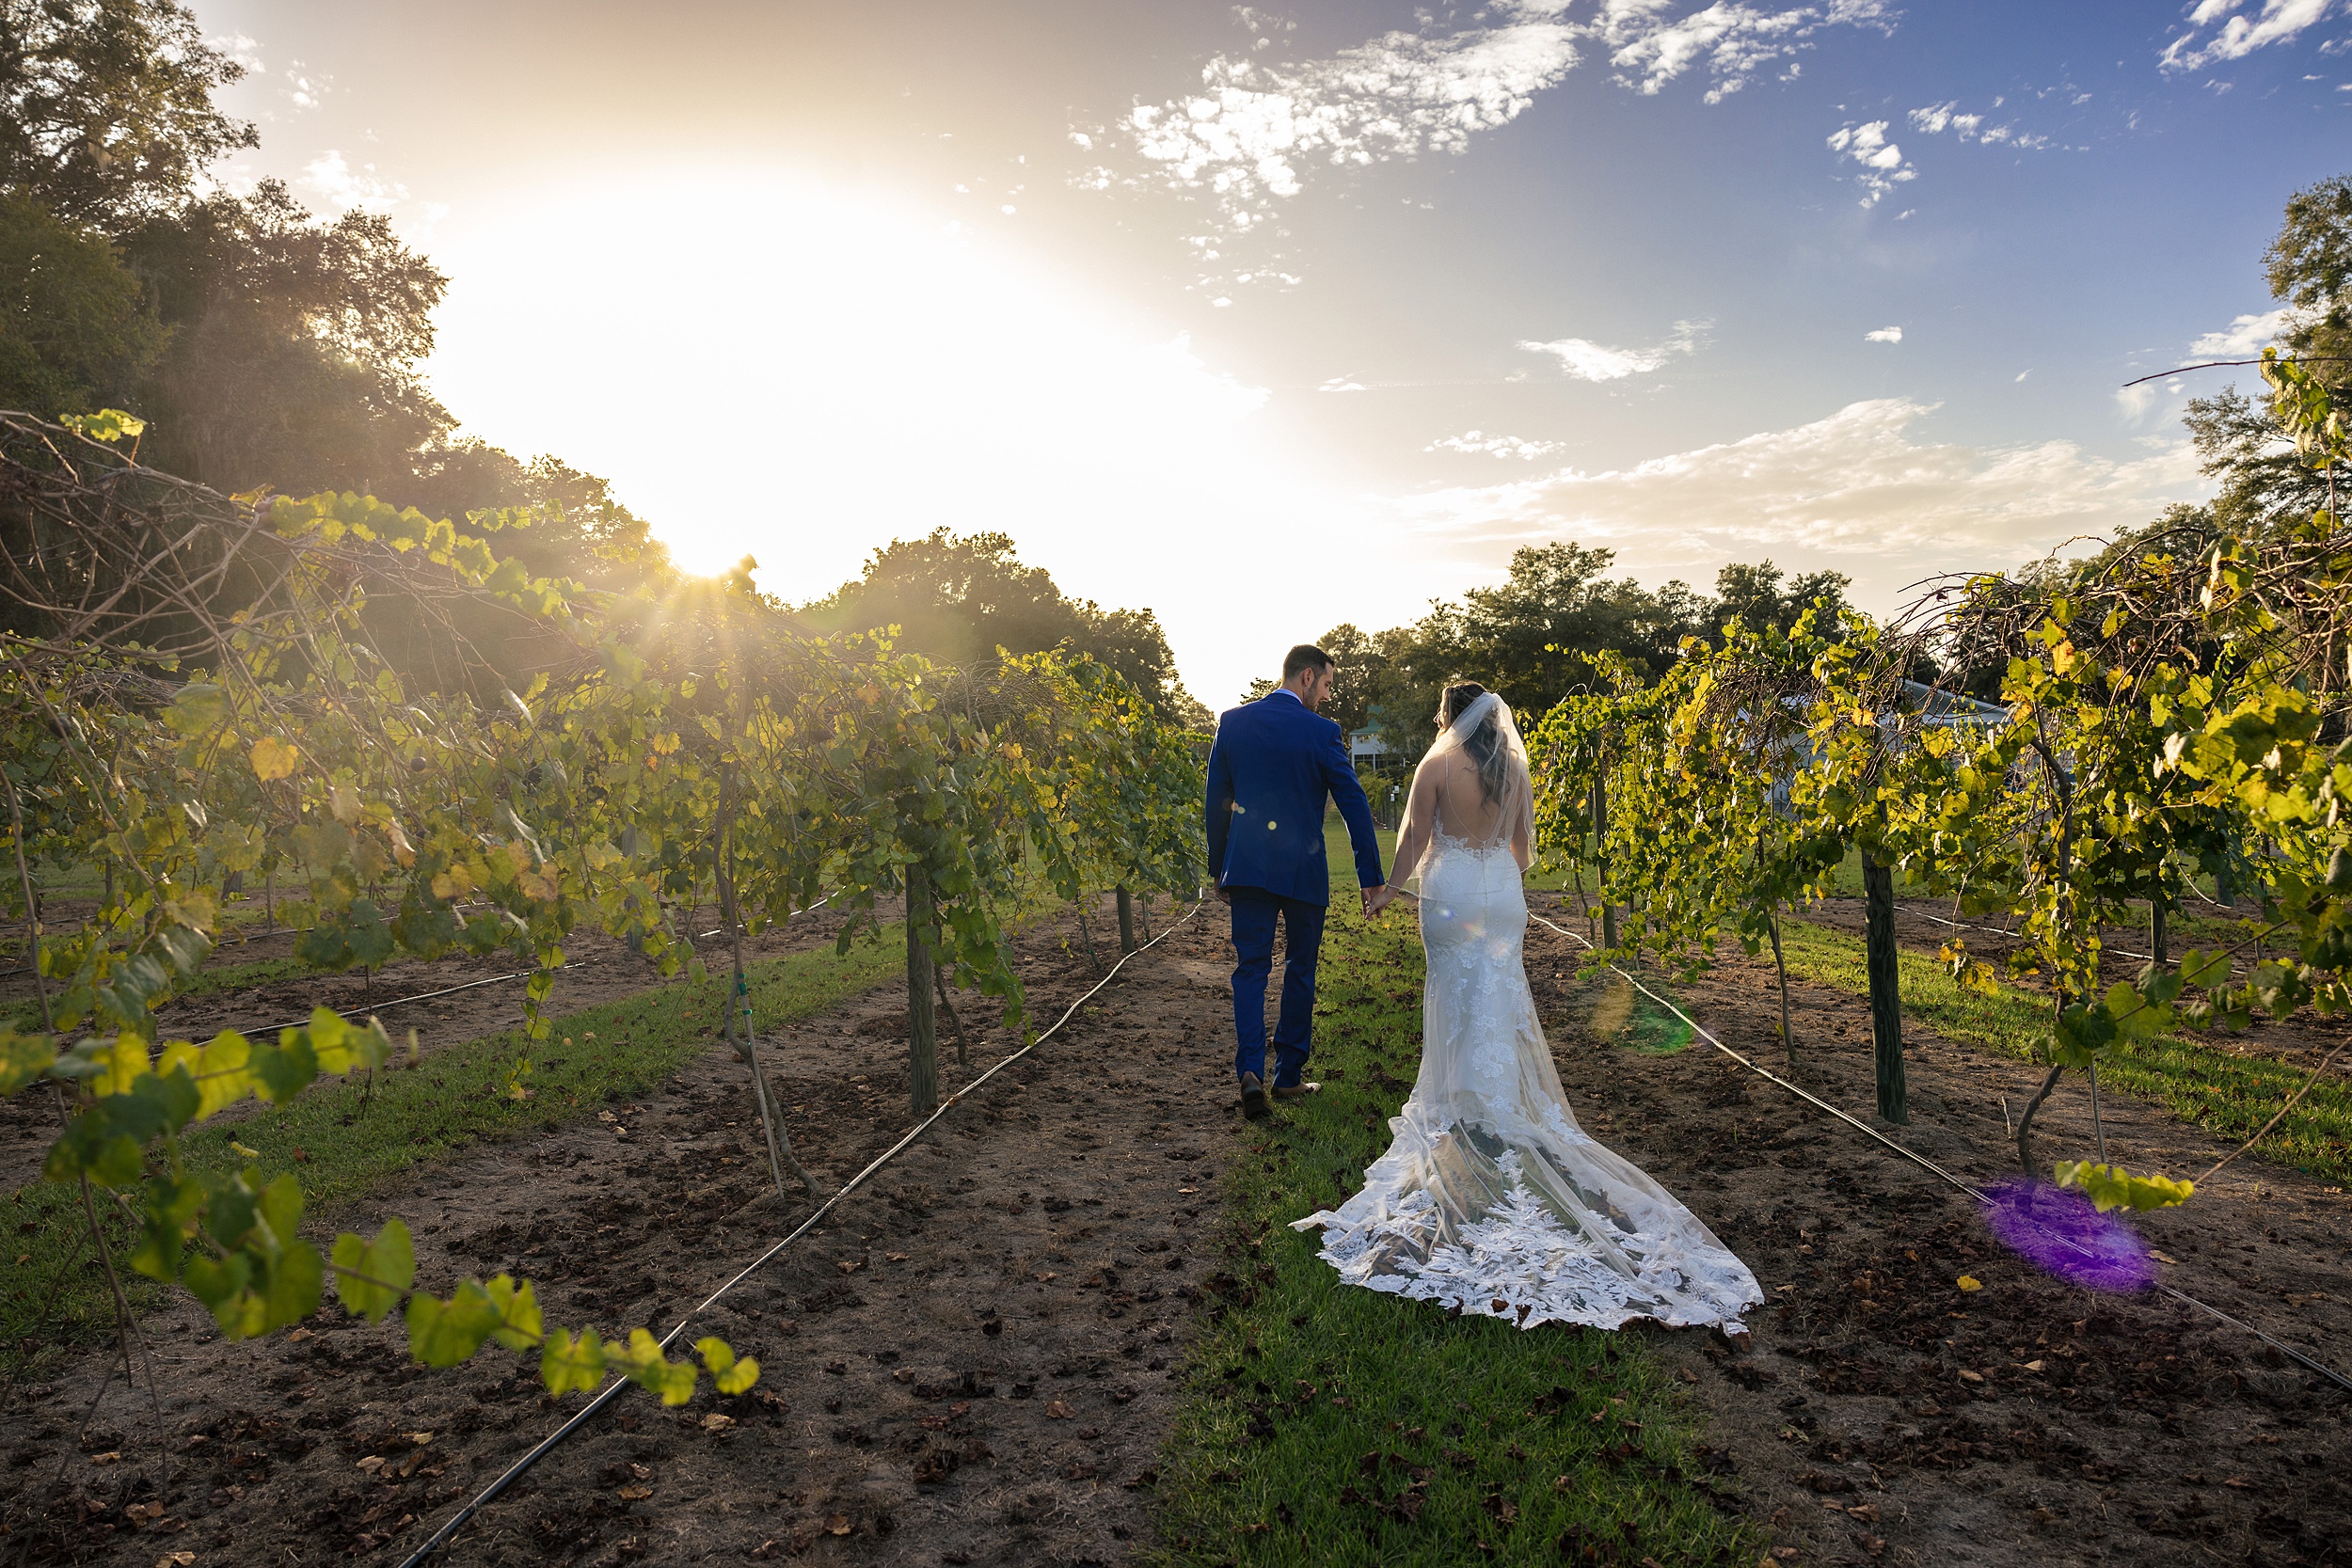 Newlyweds hold hands while walking through a vineyard at sunset